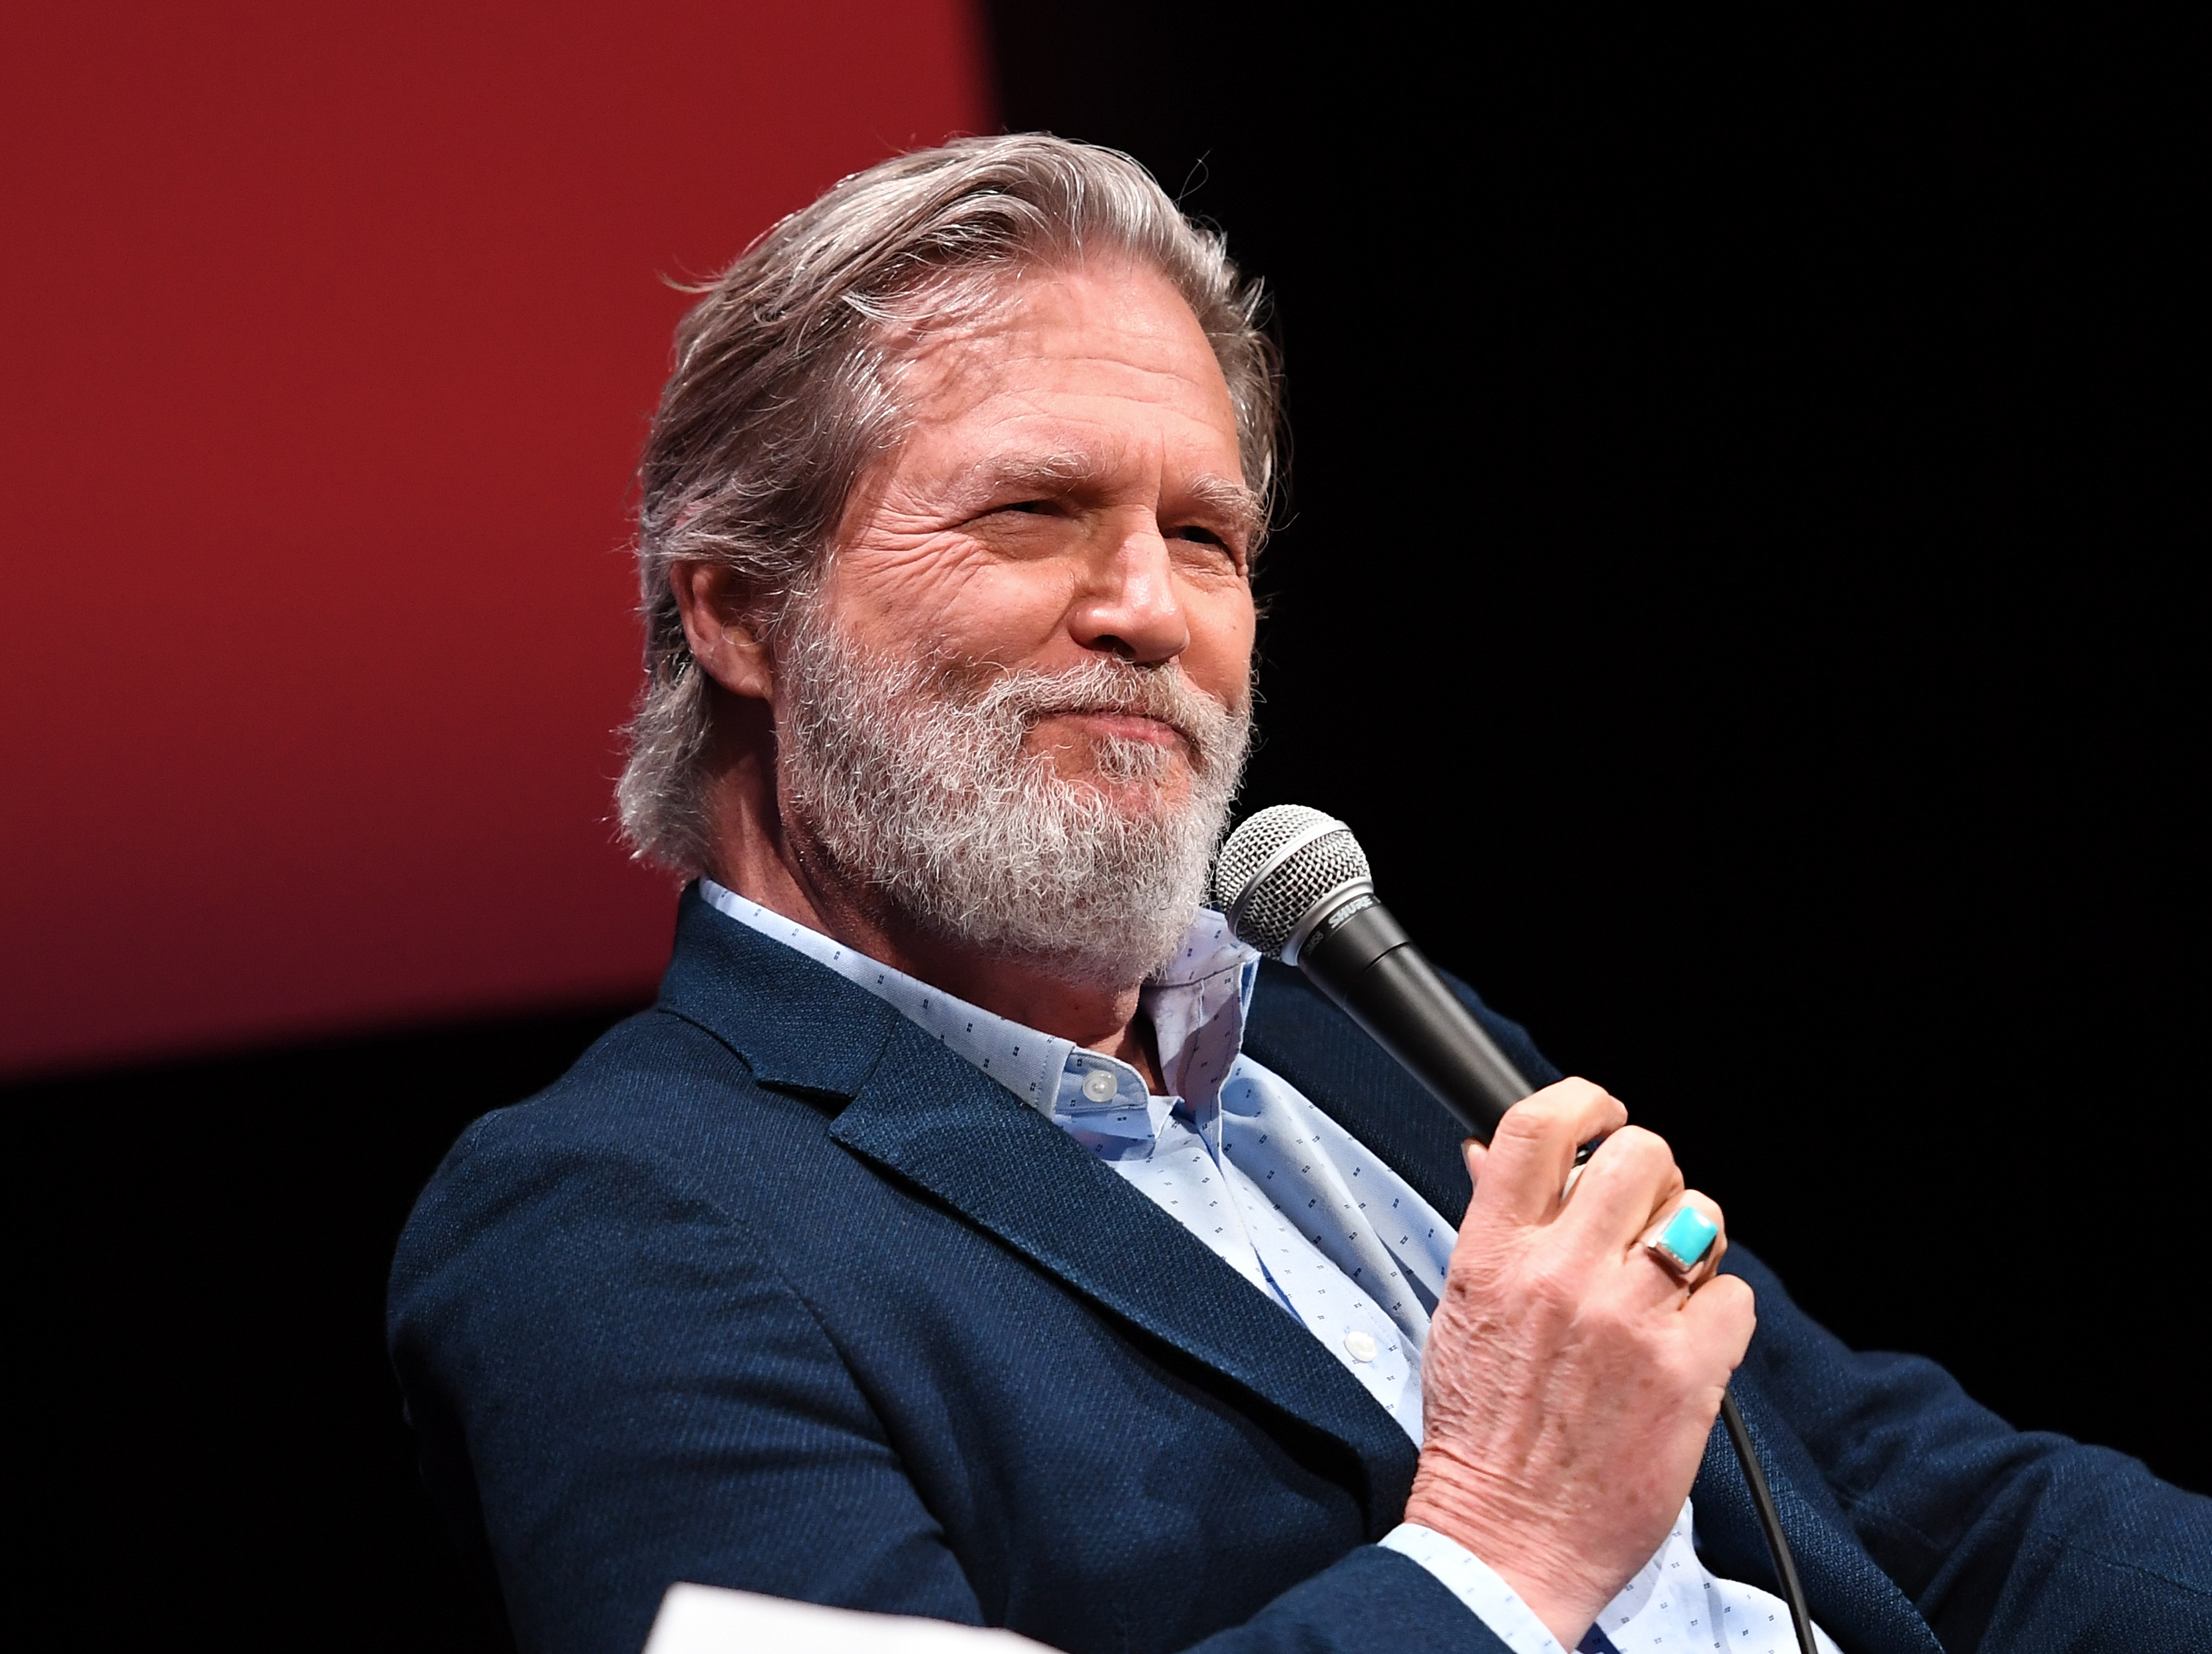 Actor Jeff Bridges speaks on January 4, 2017, during an event in New York. (ANGELA WEISS—AFP/Getty Images)